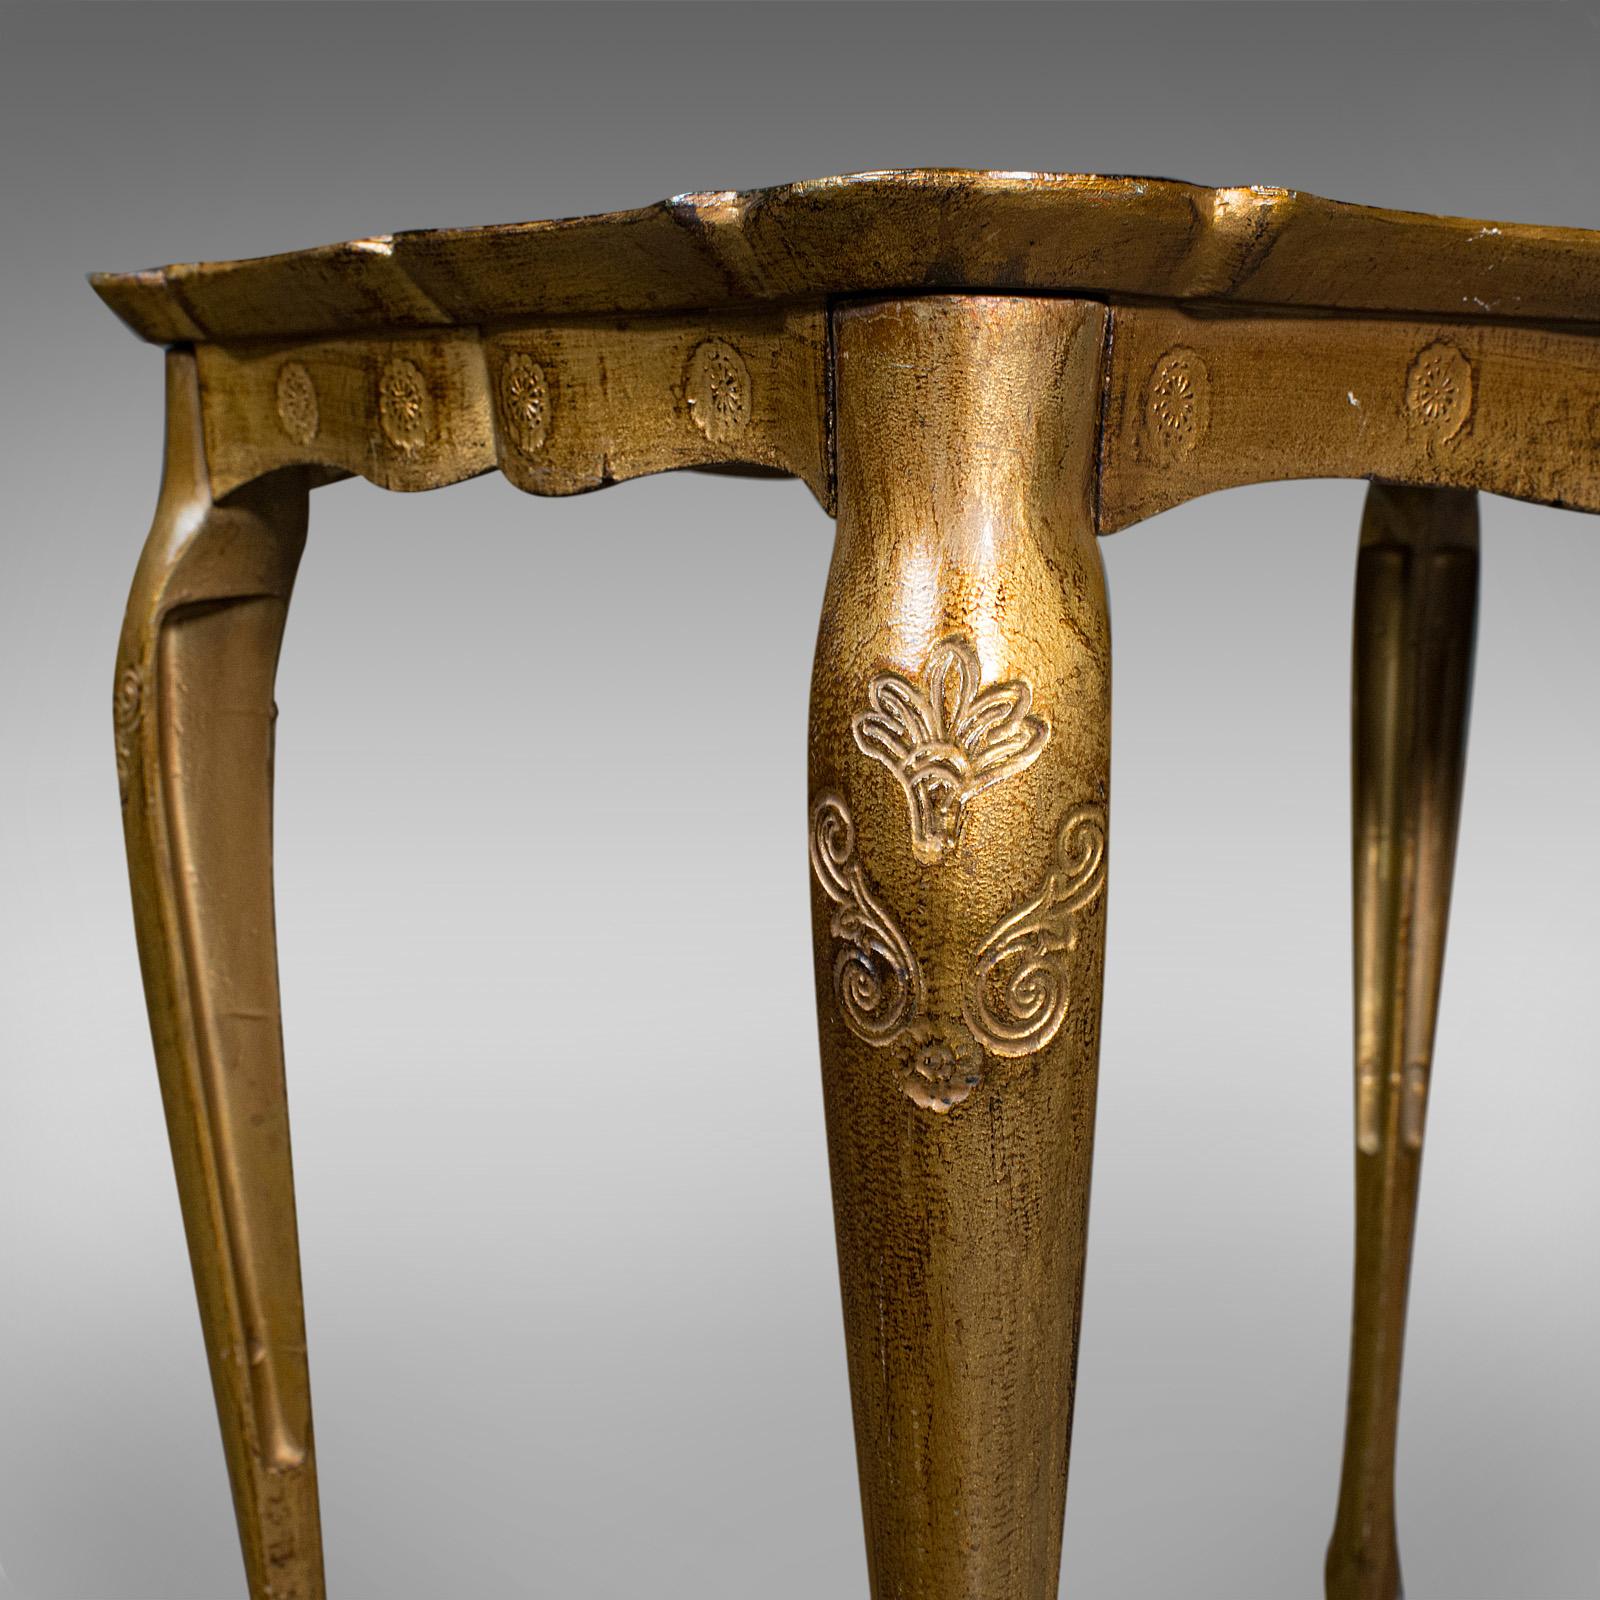 Trio of Vintage Nesting Tables, Italian, Gilt Composite, Side Table, Circa 1970 For Sale 6